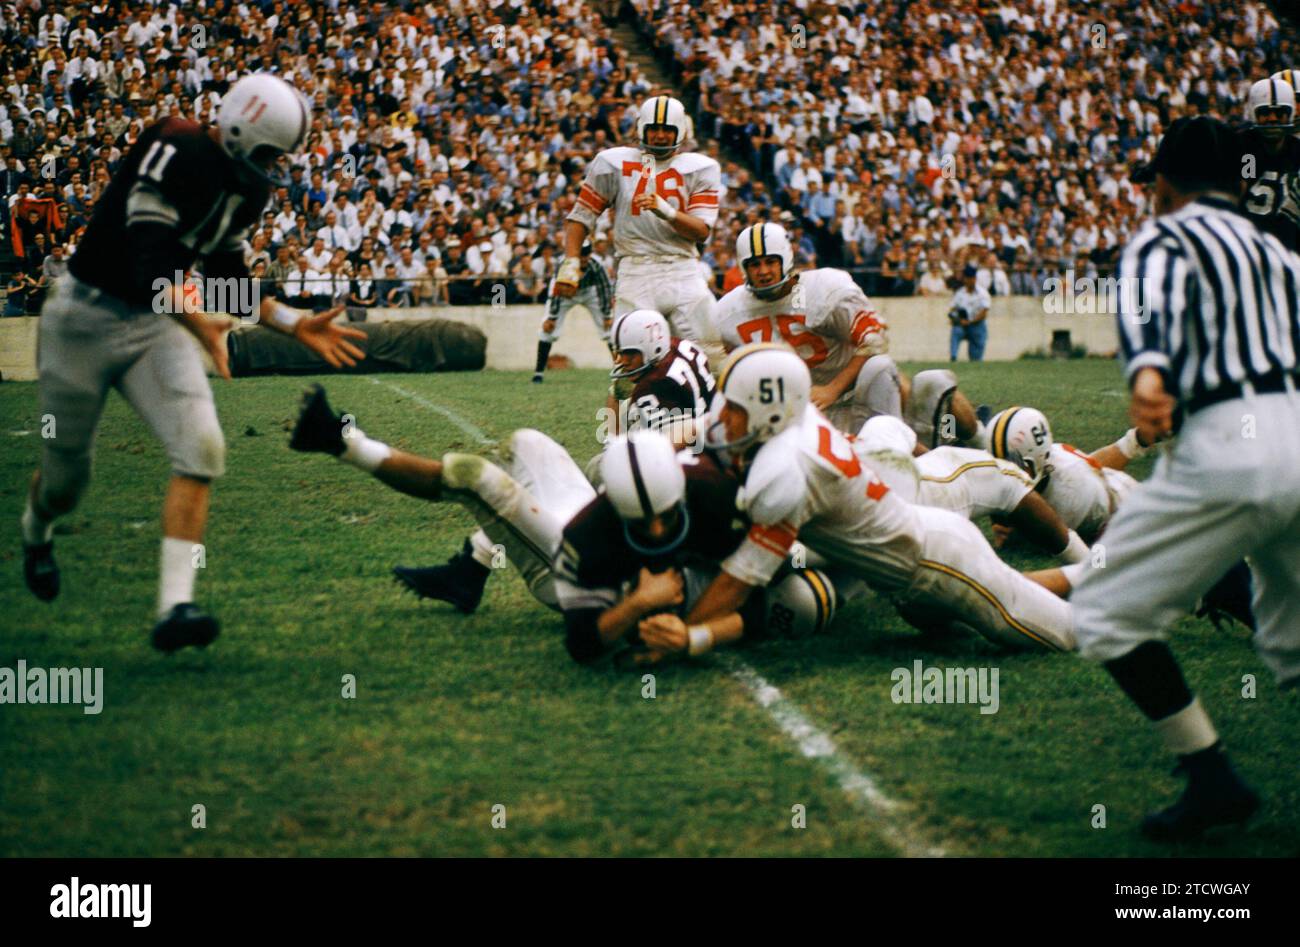 DALLAS, TX - SEPTEMBER 21:  An unidentified player of the #2 ranked Texas A&M Aggies is tackled by a group of players from the Maryland Terrapins during the game on September 21, 1957 at the Cotton Bowl in Dallas, Texas.  The Aggies defetead the Terrapins 21-13.  (Photo by Hy Peskin) Stock Photo